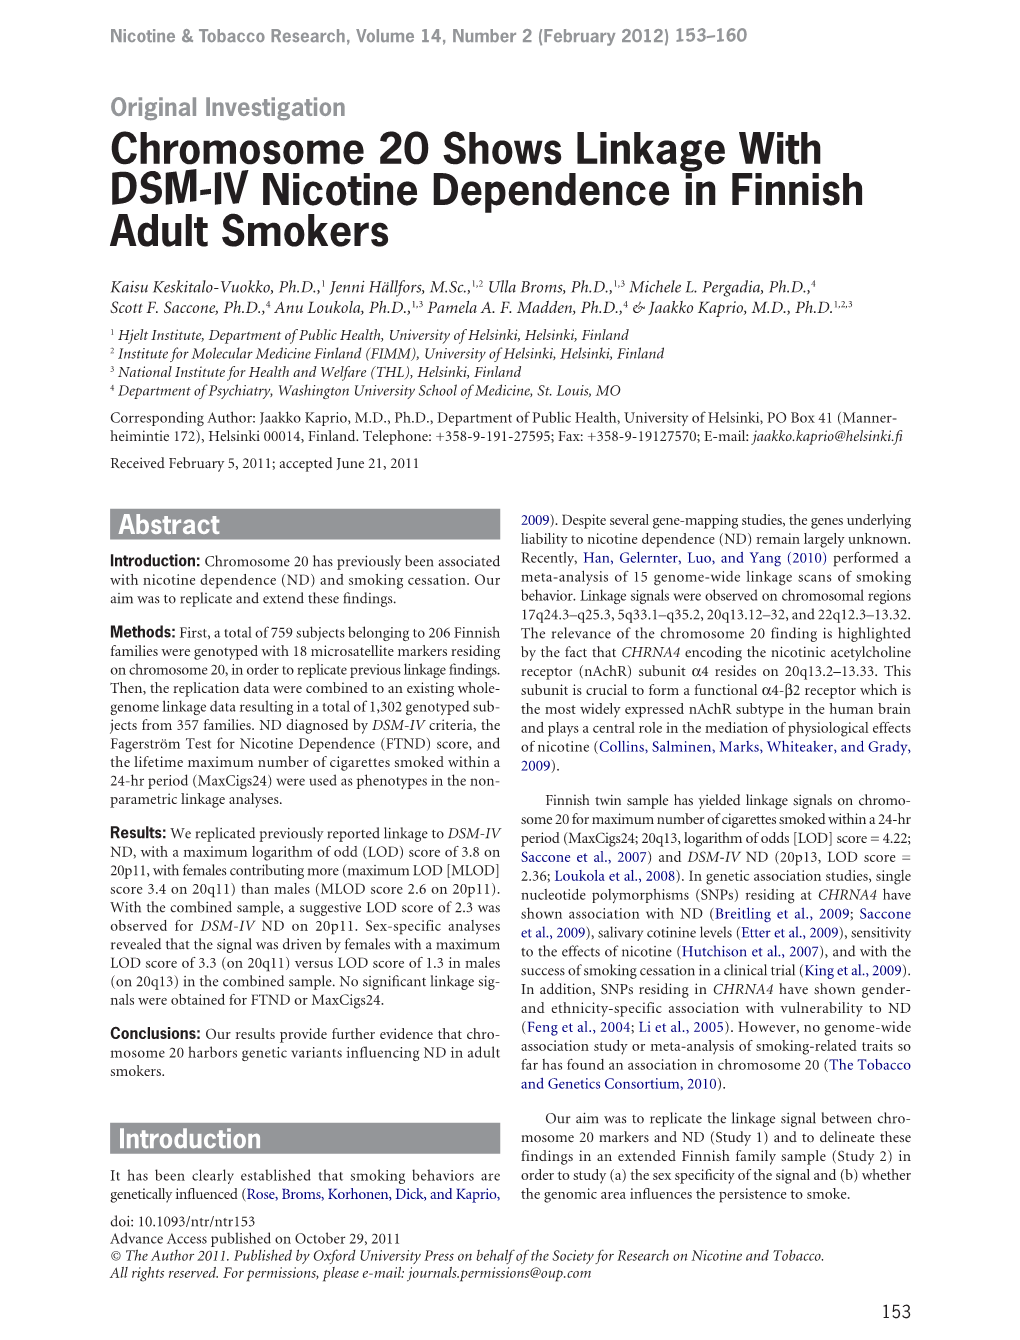 Chromosome 20 Shows Linkage with DSM-IV Nicotine Dependence in Finnish Adult Smokers